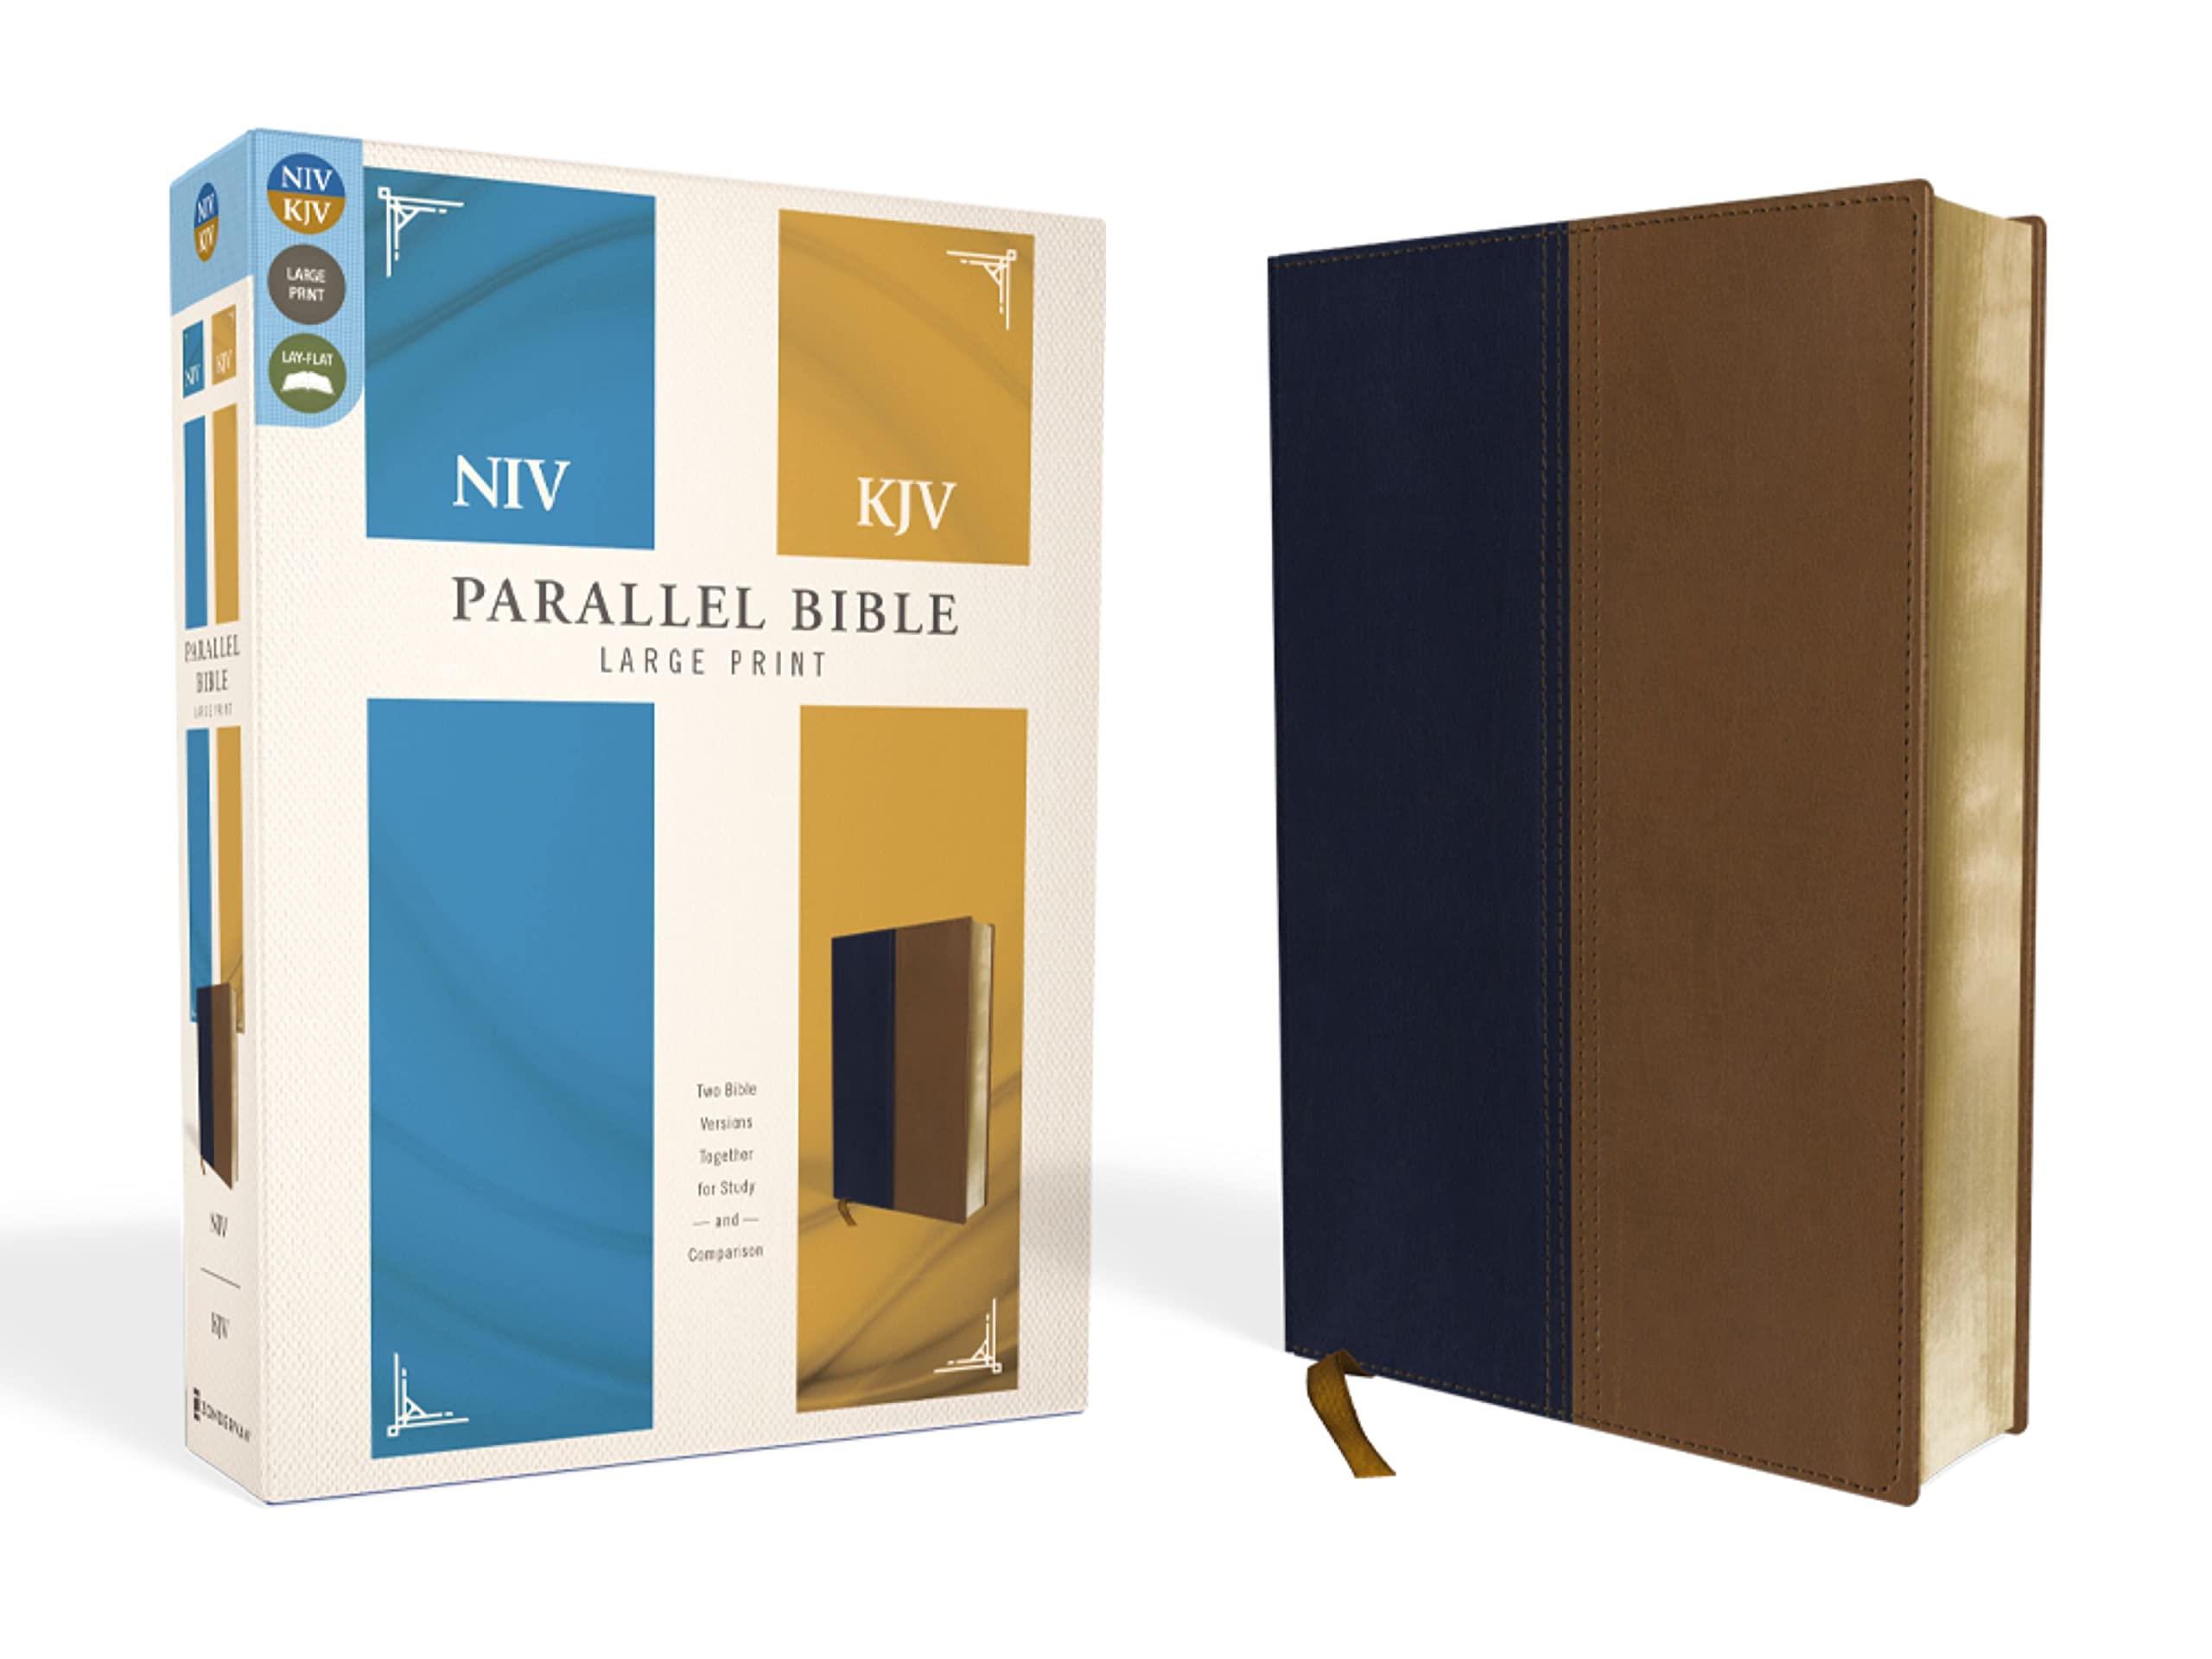 NIV, KJV, Parallel Bible, Large Print, Leathersoft, Navy/Tan: The World's Two Most Popular Bible Translations Together